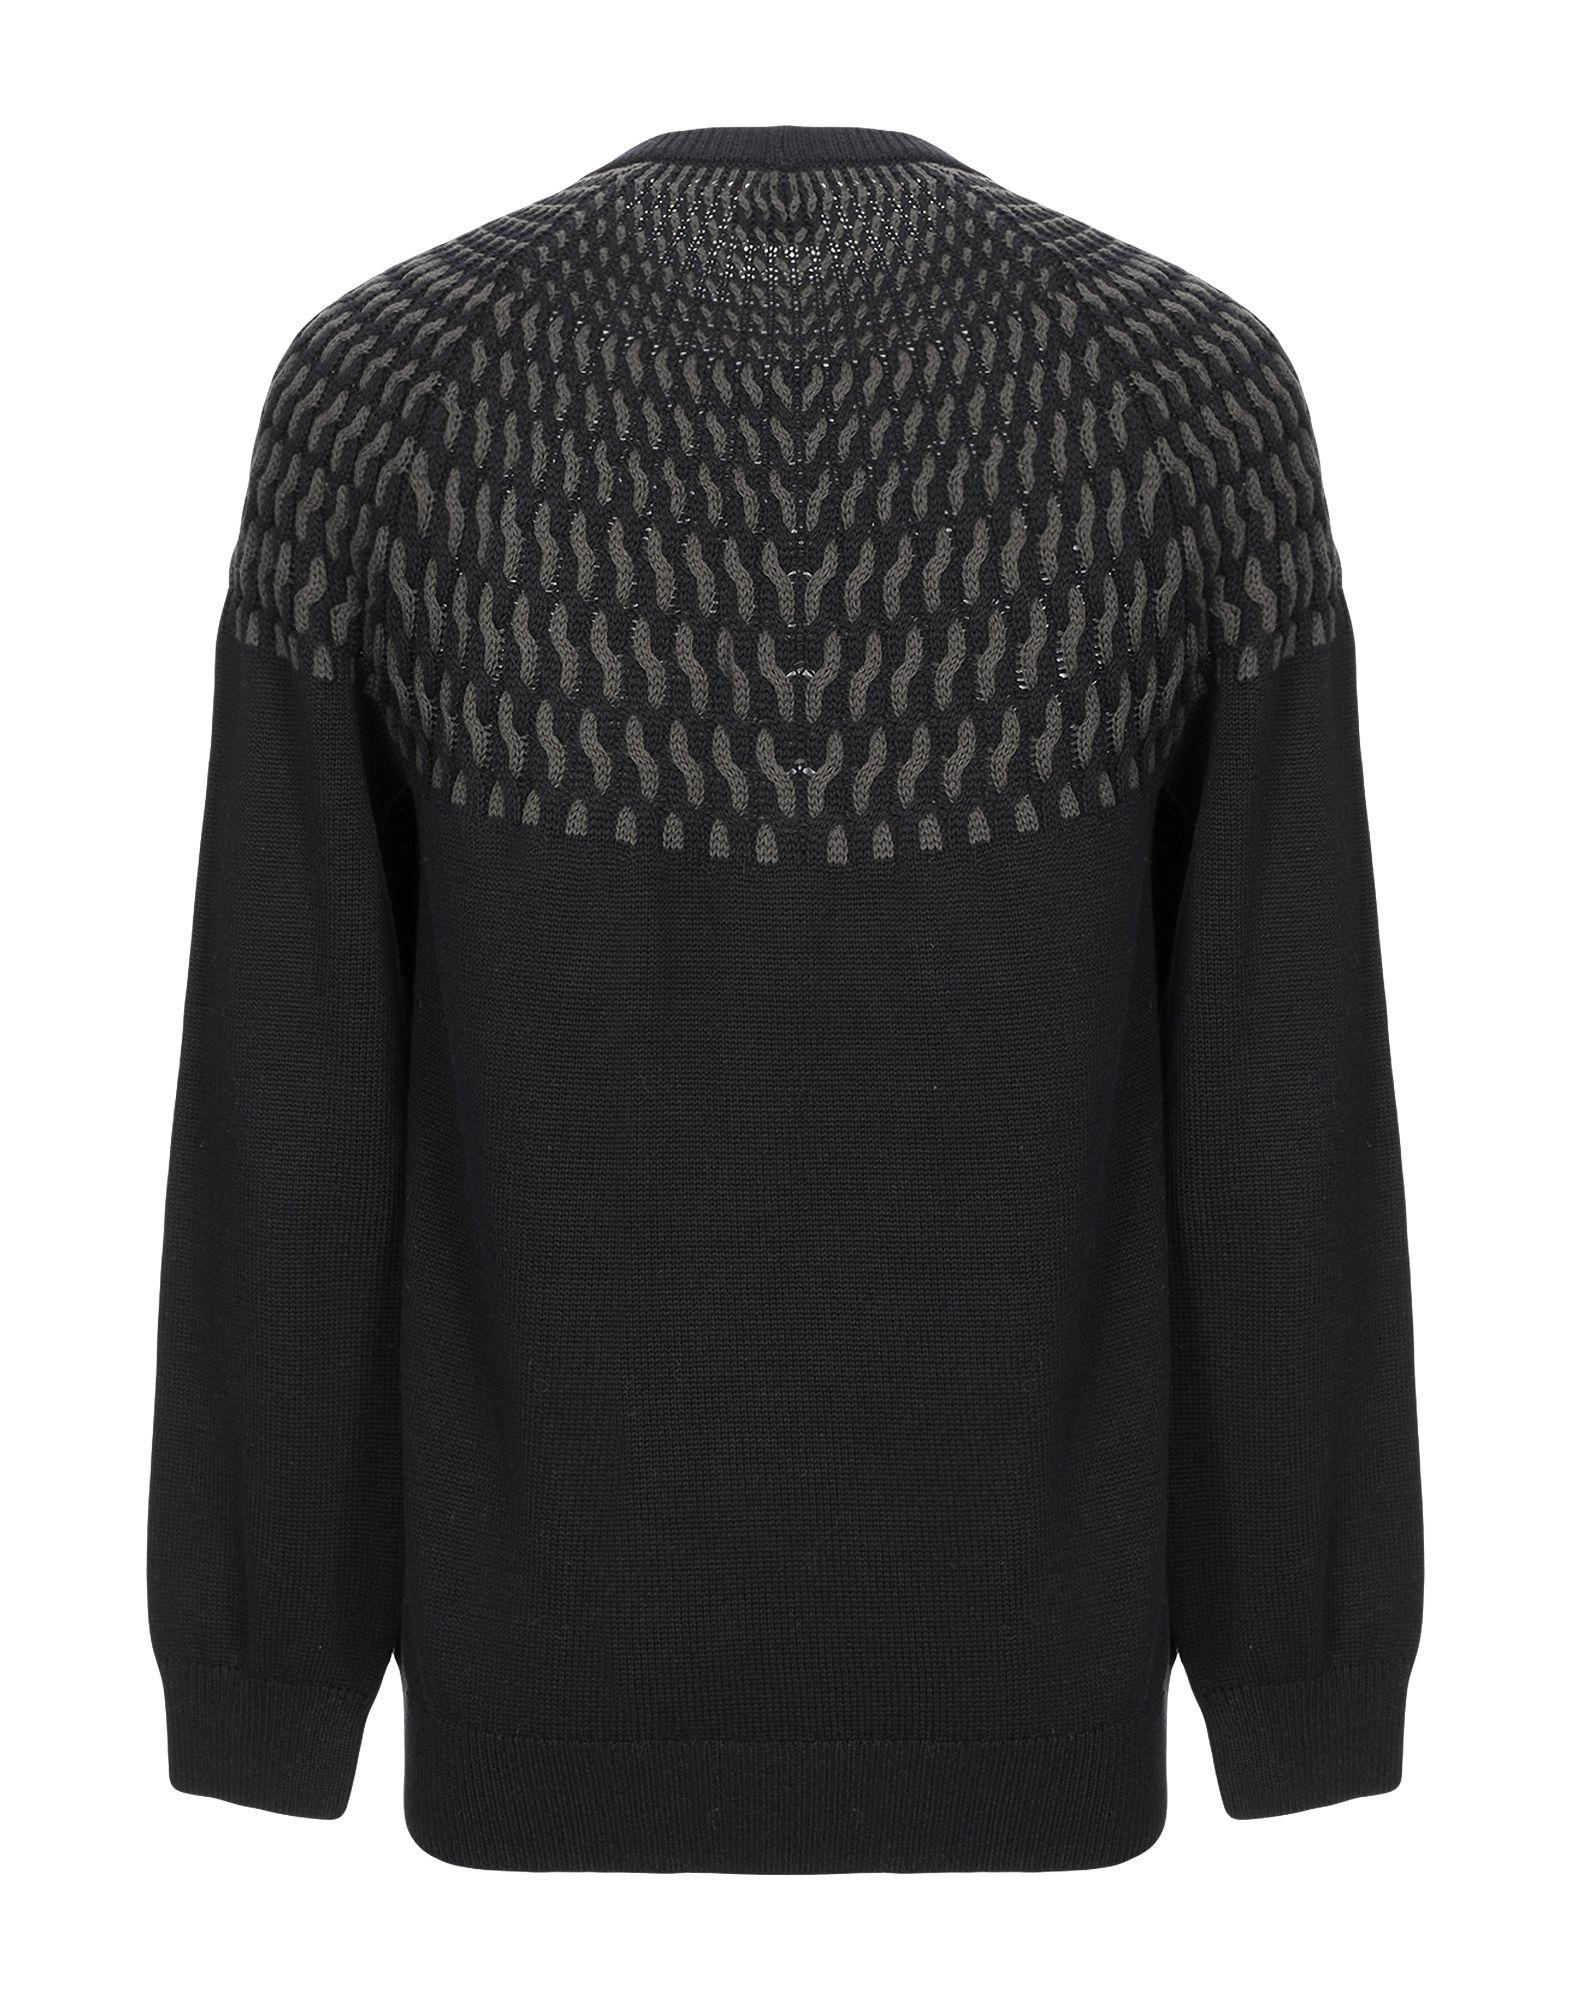 Armani Exchange Cotton Sweater in Black for Men - Lyst